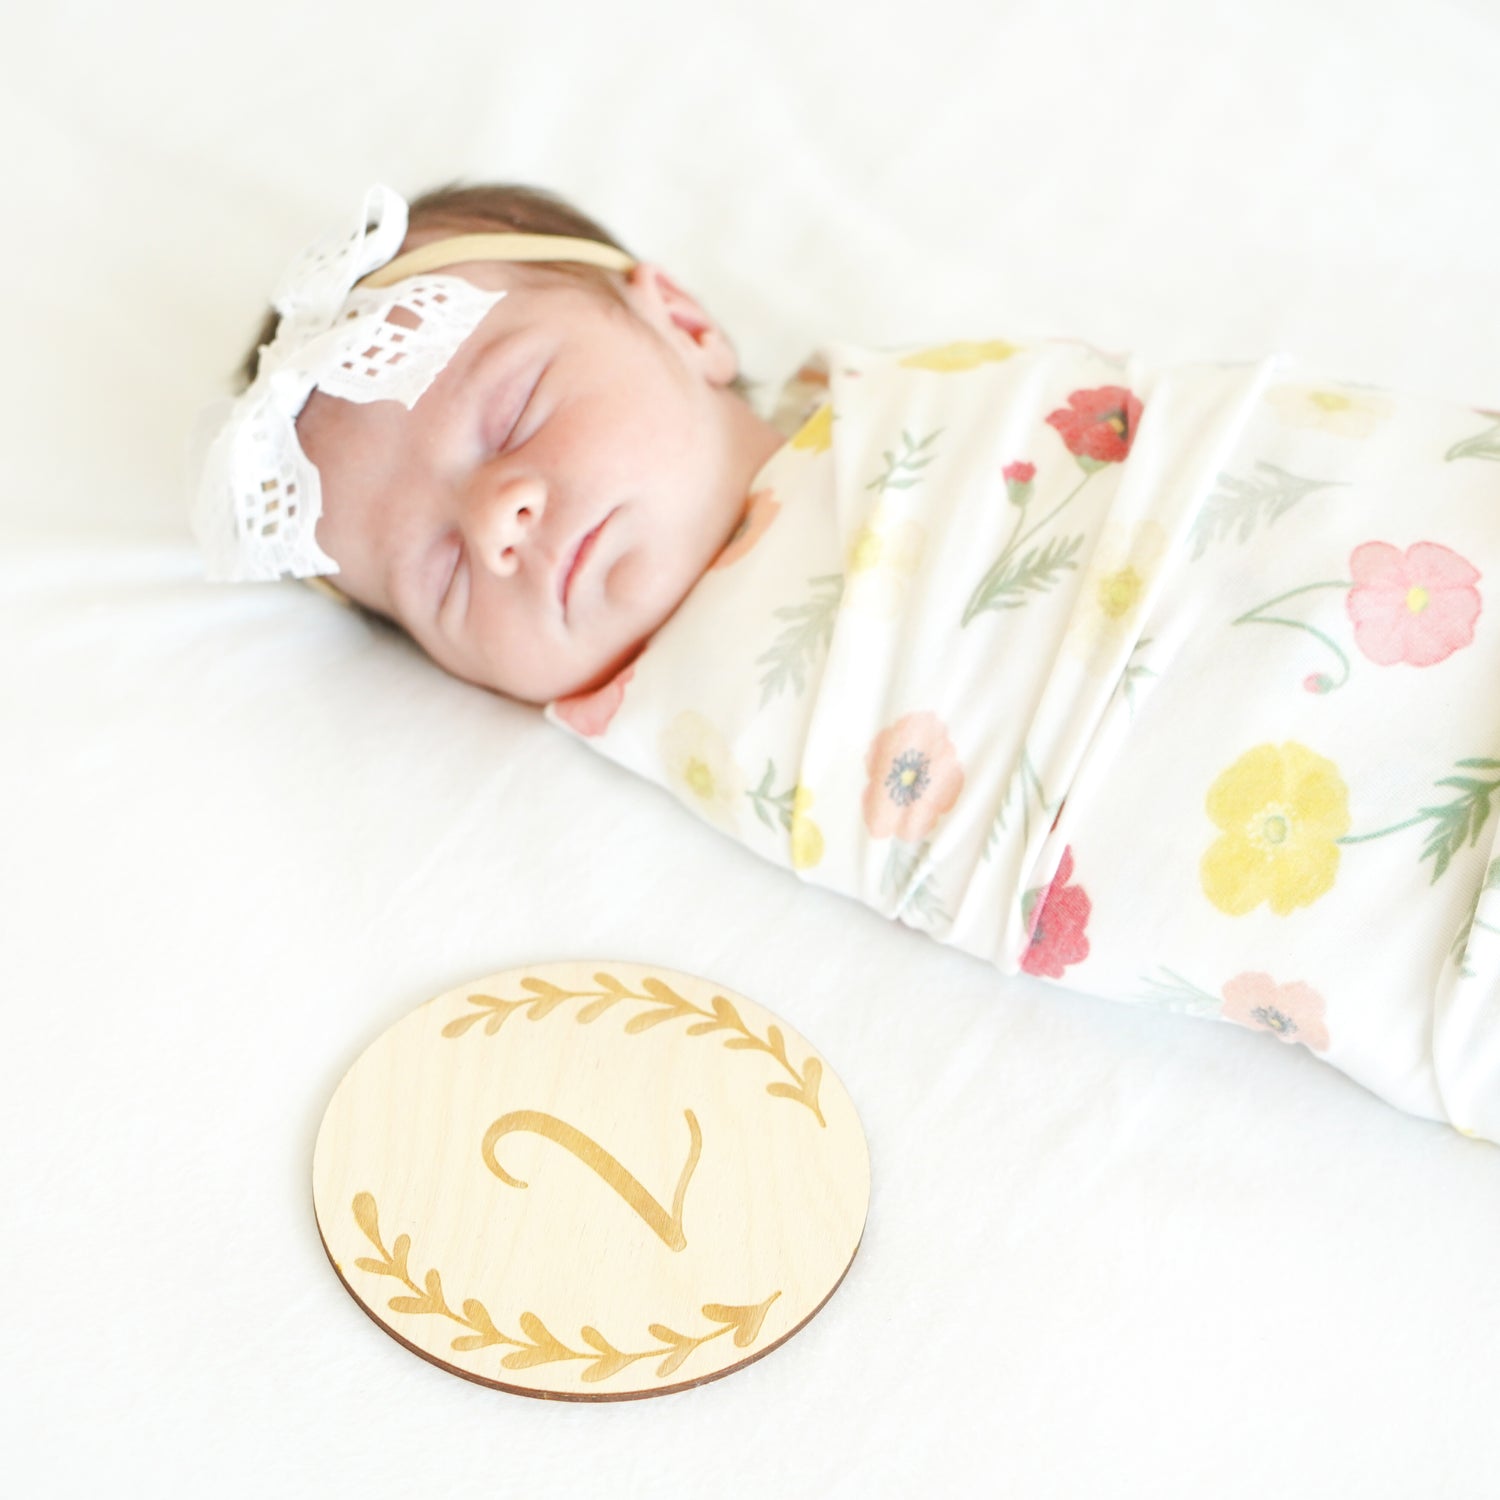 baby with 2 month age growth milestone sign disc round swaddle and bow